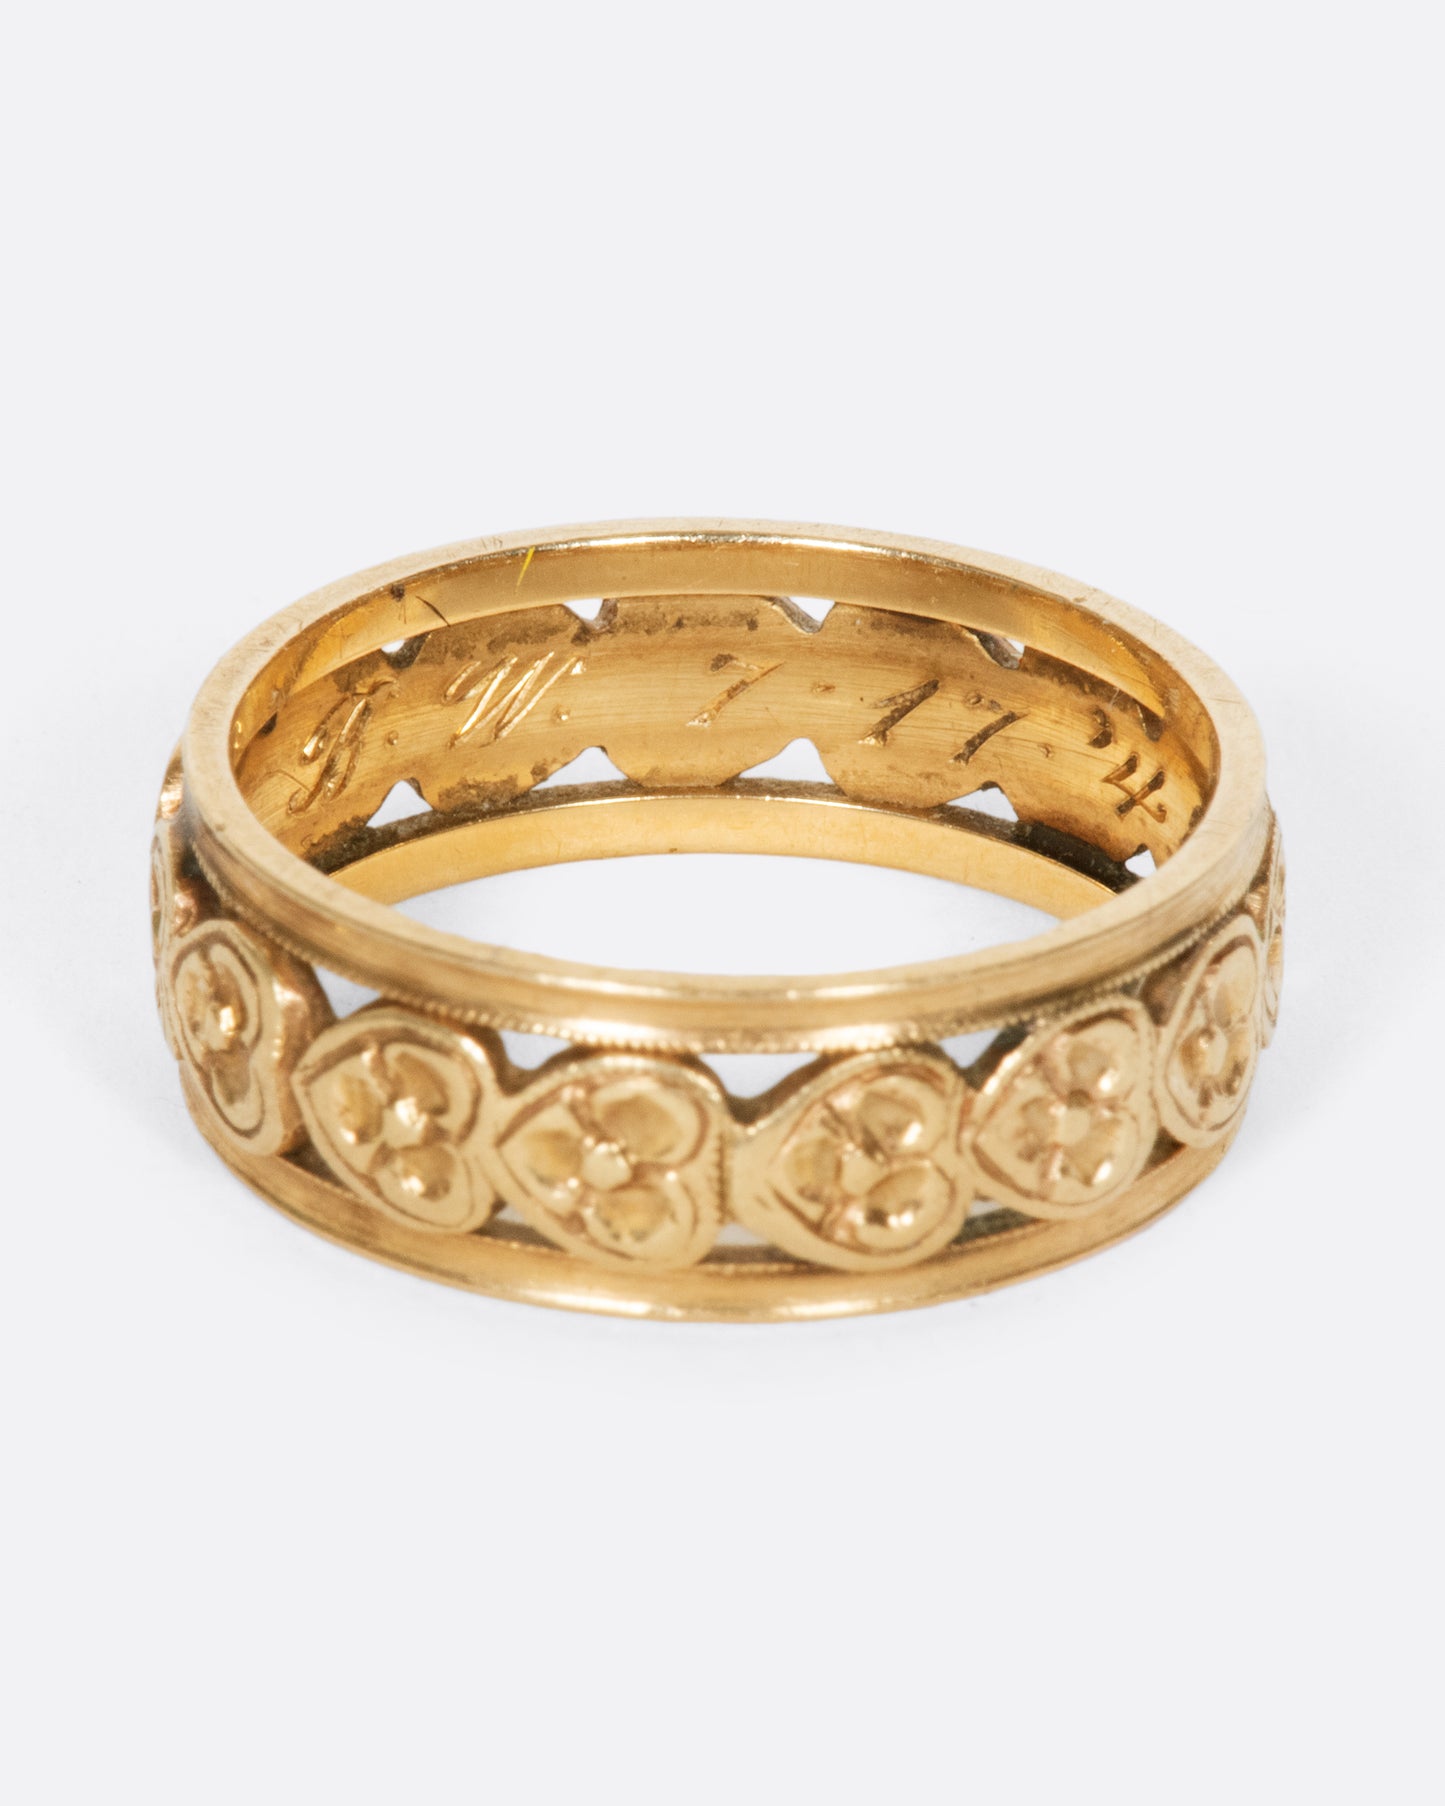 A yellow gold band ring lined with sideways hearts, shown from the side.